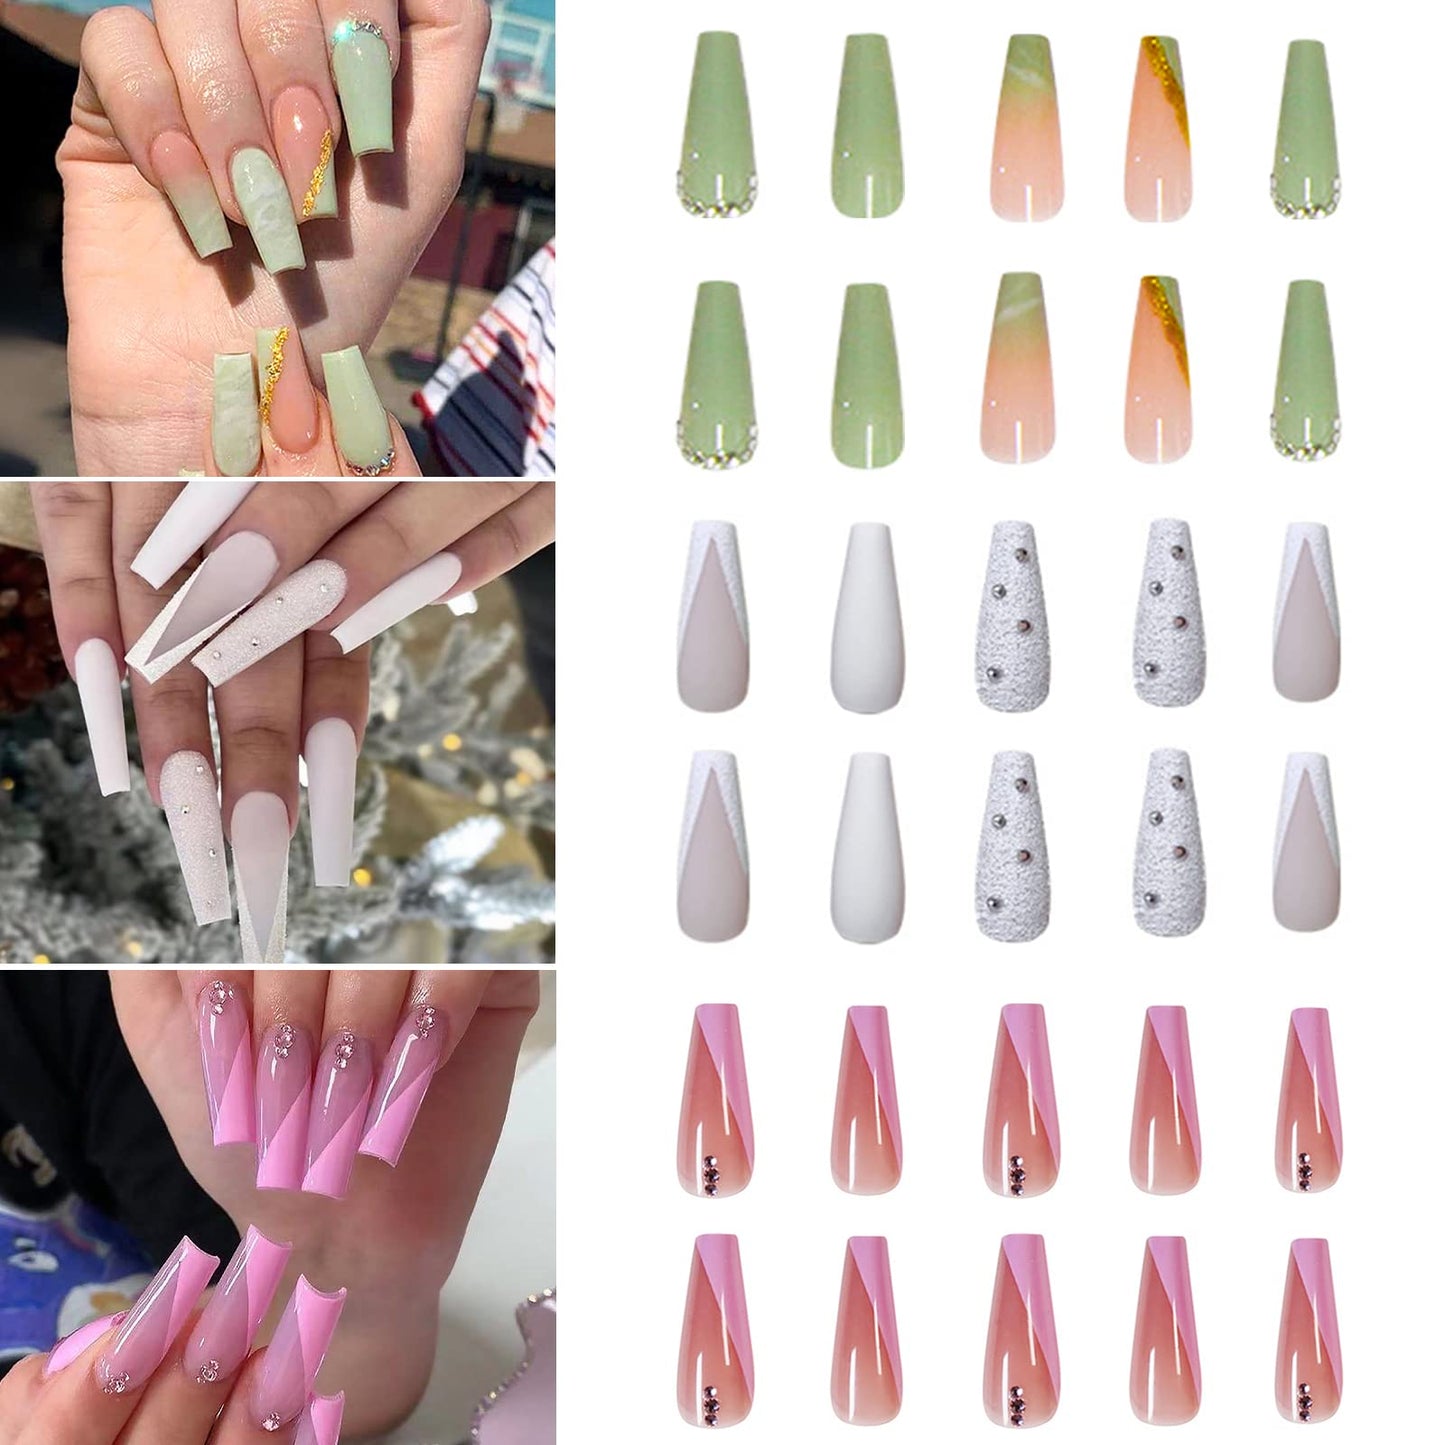 YOSOMK 3 Pack(72pcs)Gems French Tip Long Press on Nails Medium Length with Designs Pink Green Grey Graffiti False Fake Nails Press On Coffin Artificial Nails for Women Stick on Nails With Glue on Static nails